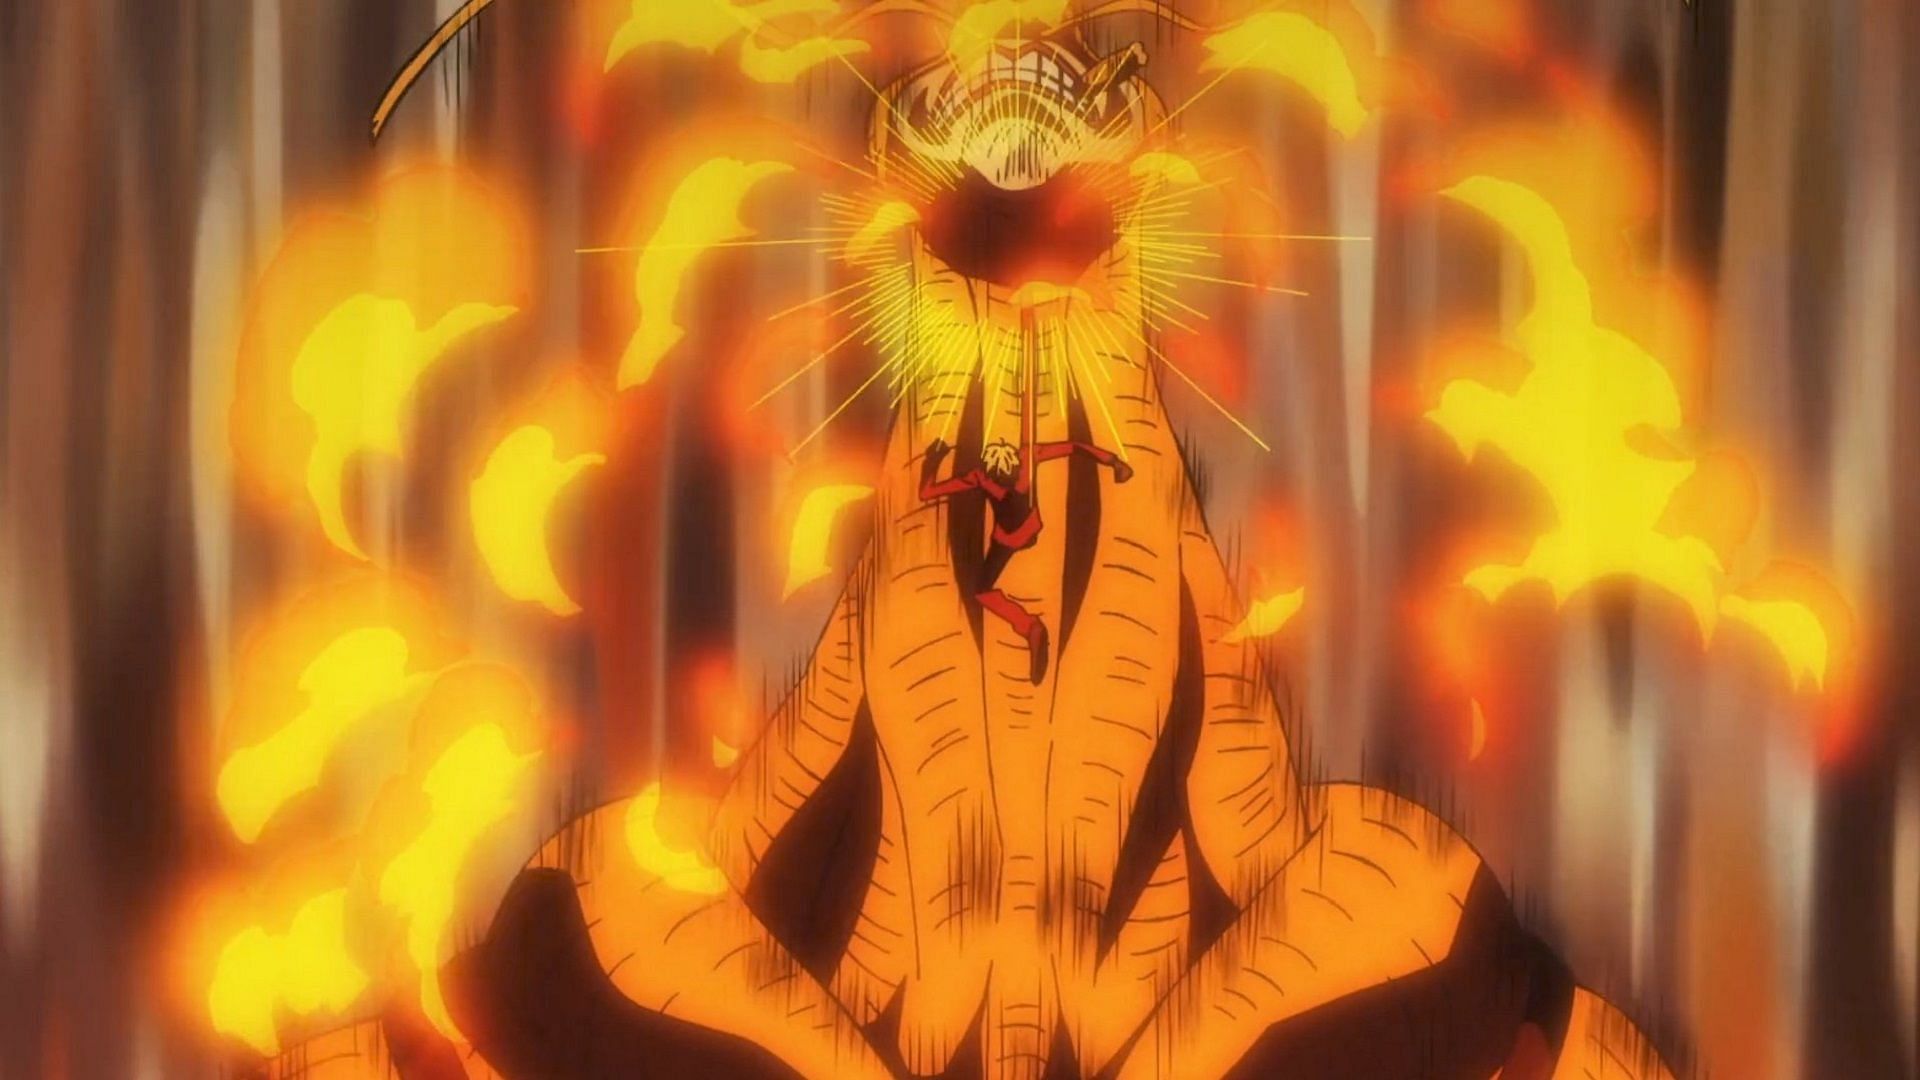 One Piece episode 1061's climactic showdown sees Sanji unleashing his  greatest trump card